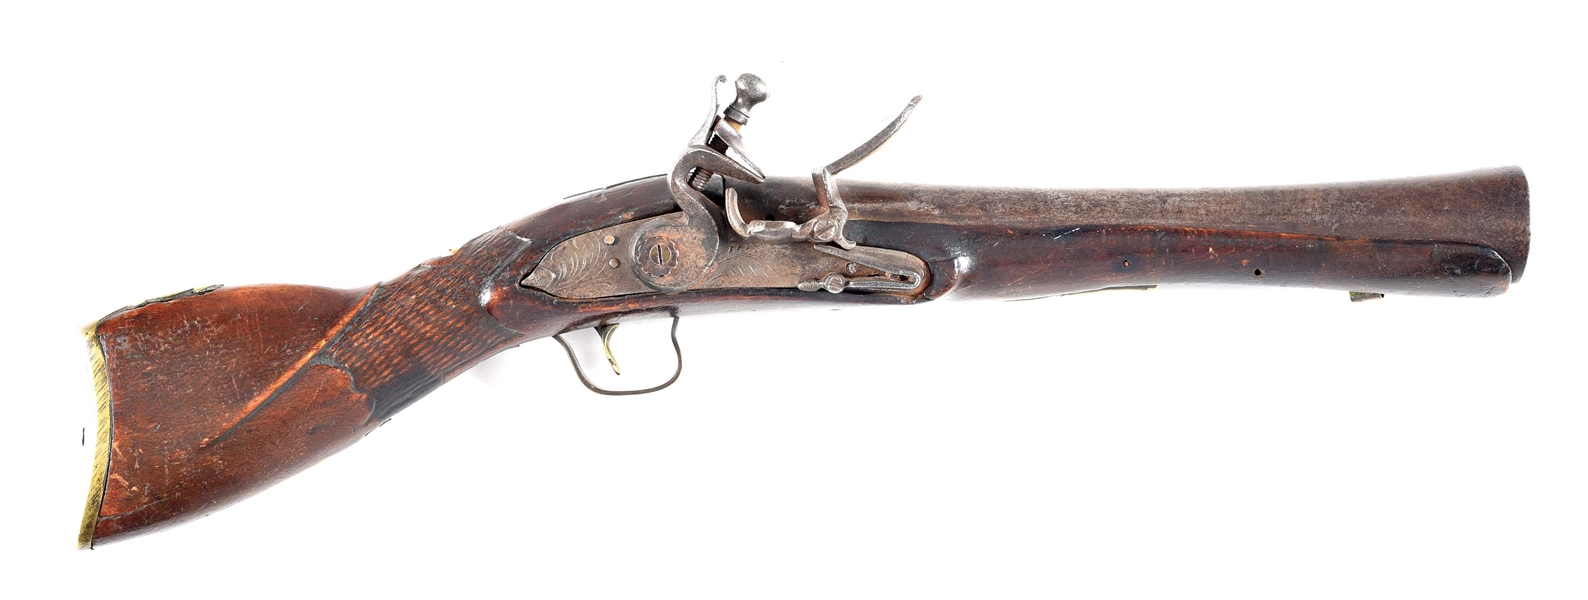 (A) A MIDDLE EASTERN FLINTLOCK BLUNDERBUSS, MOST LIKELY MADE FOR THE TOURIST TRADE.